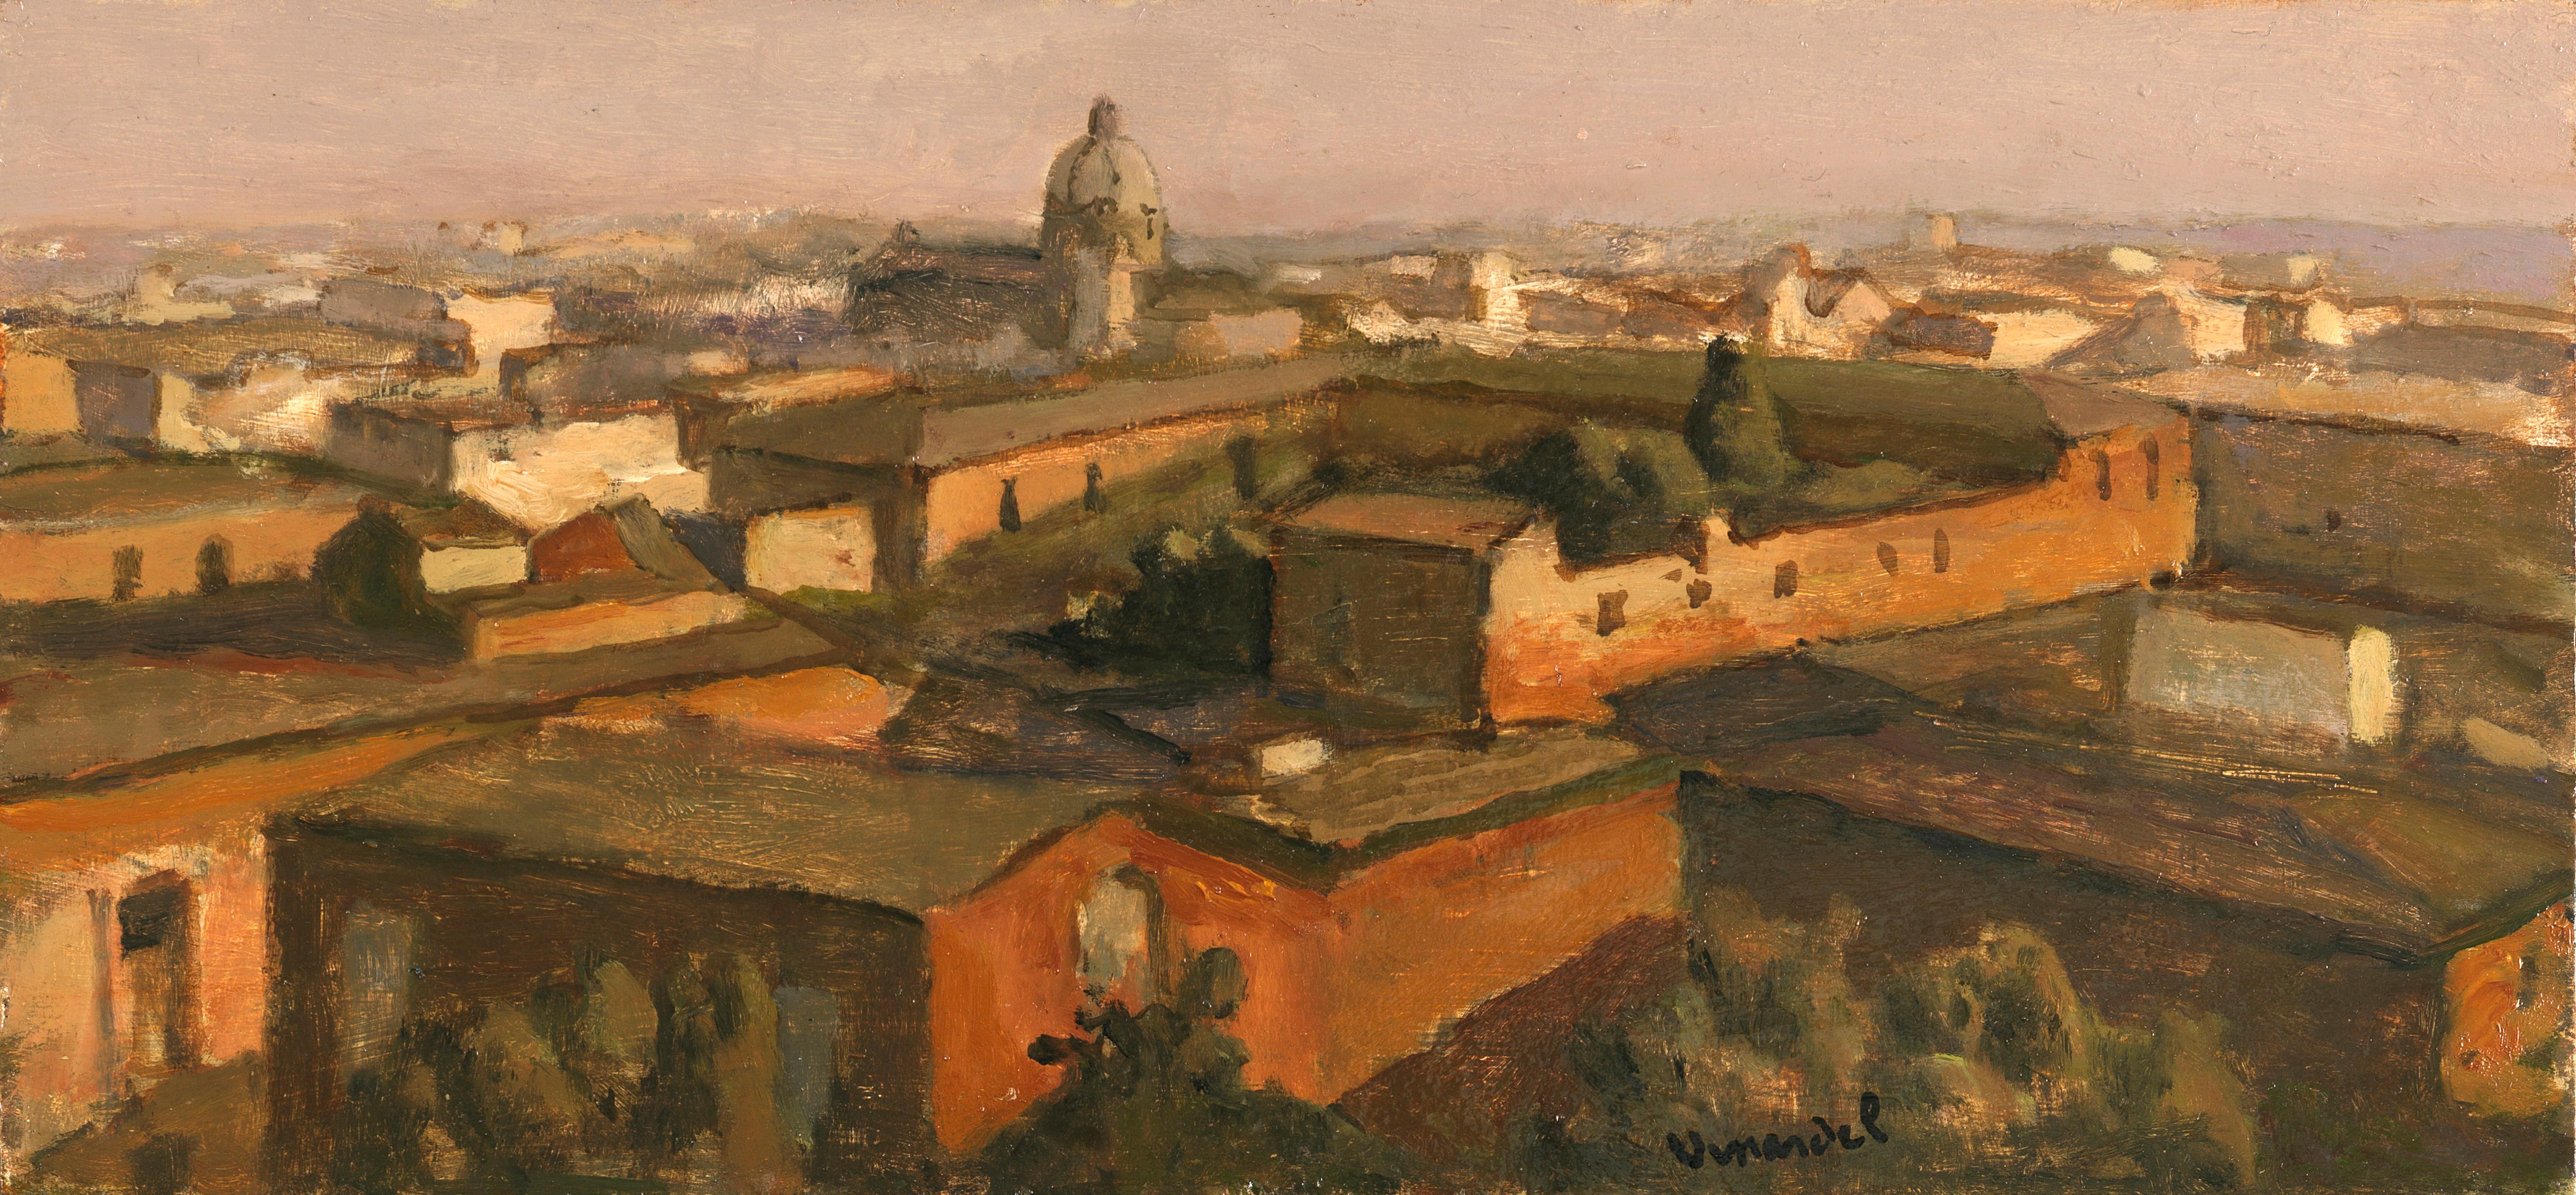 Rome, basilica, evening, dust - Painting by Pascal Vinardel